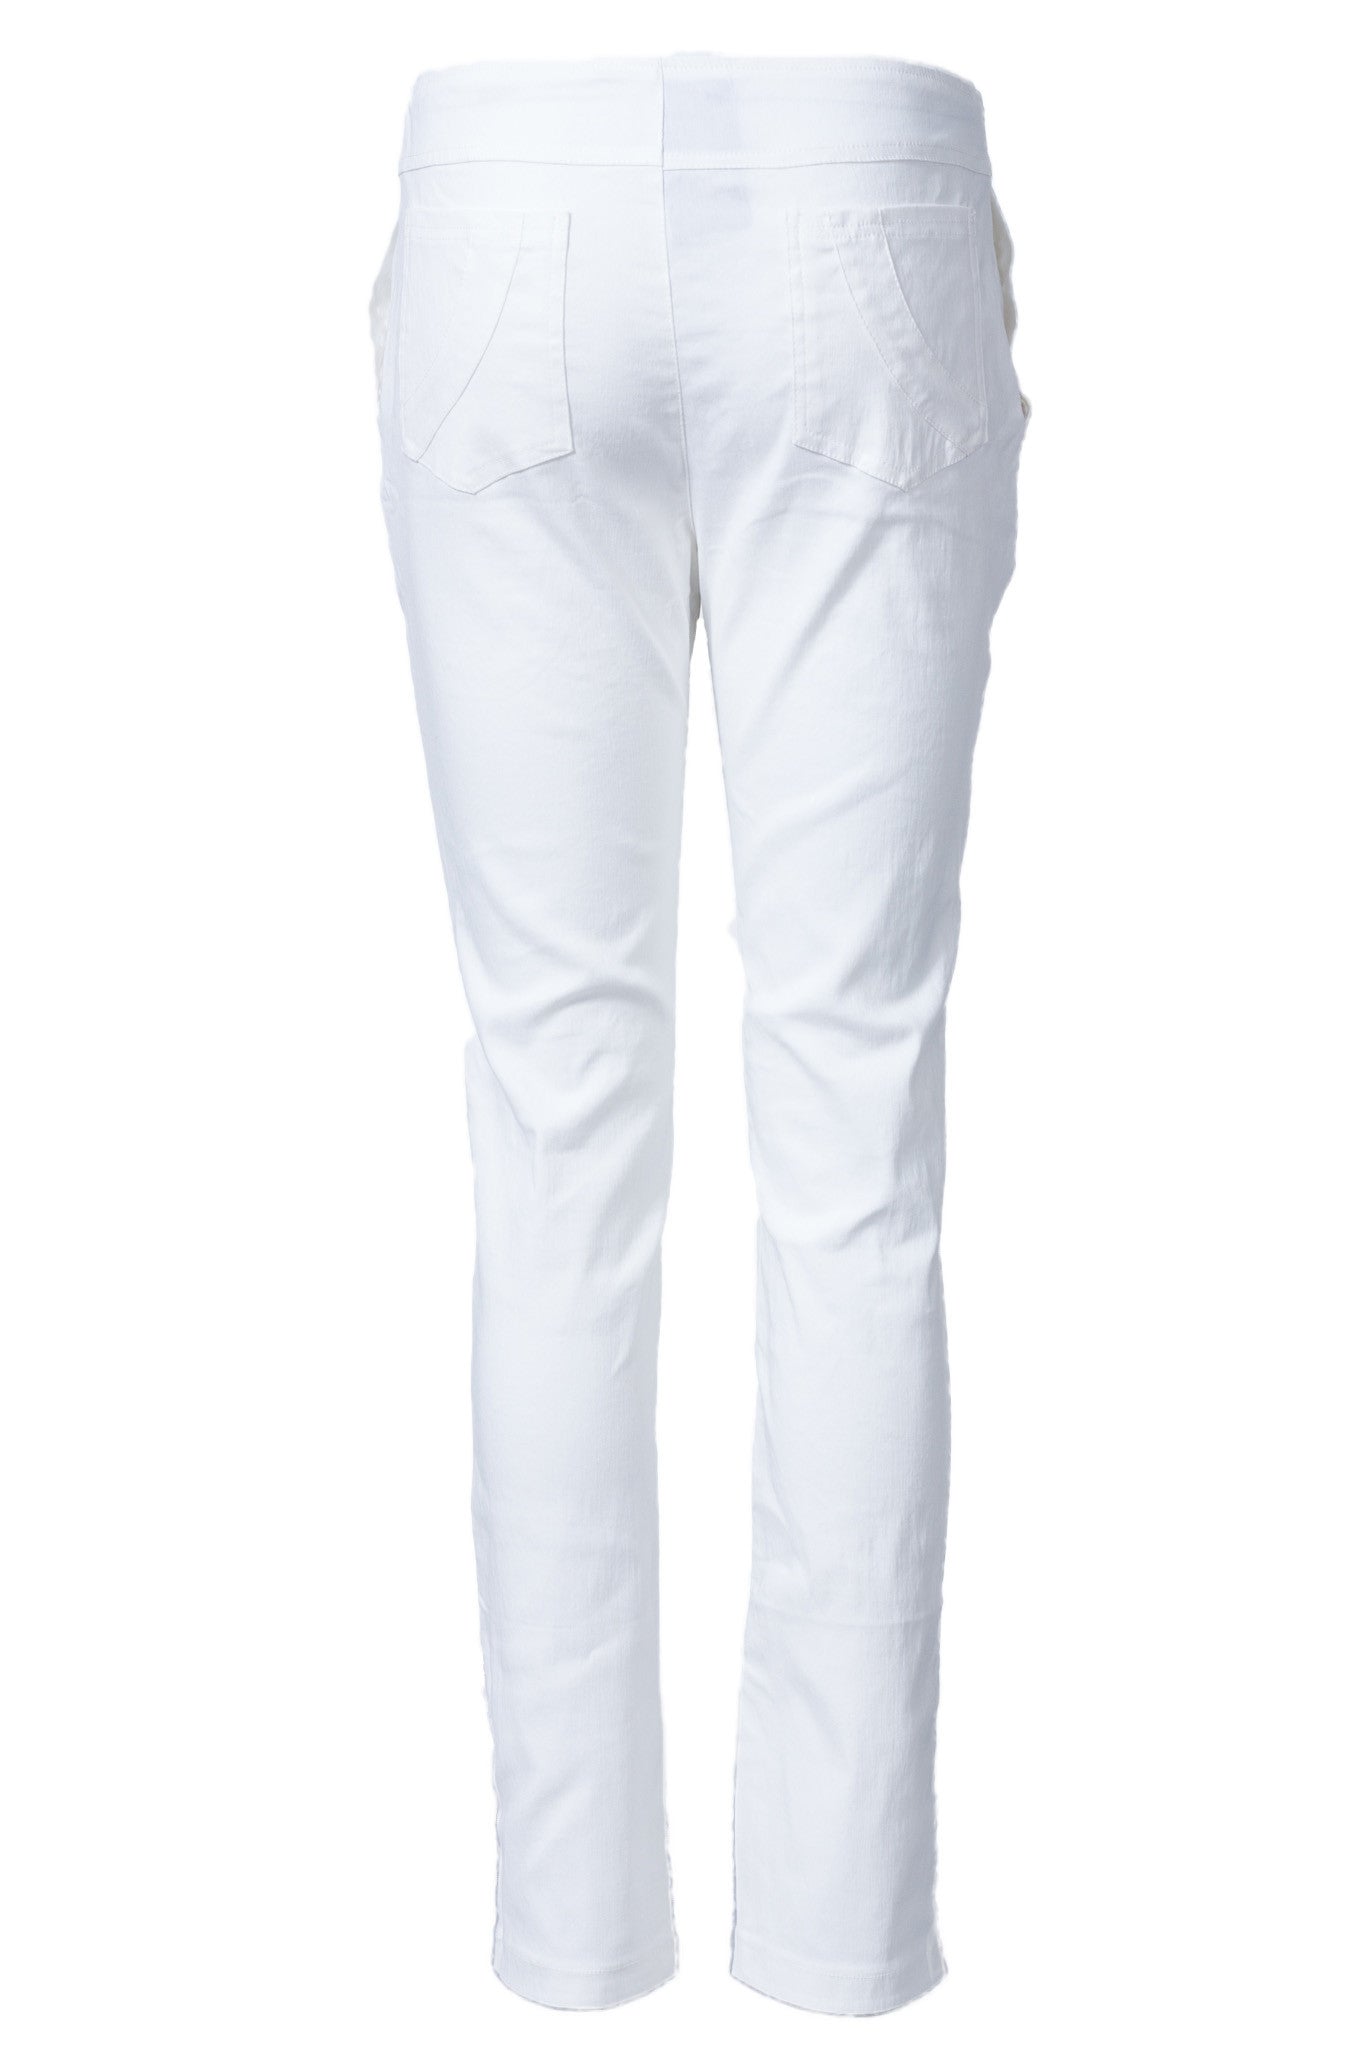 Pant without Zipper - White